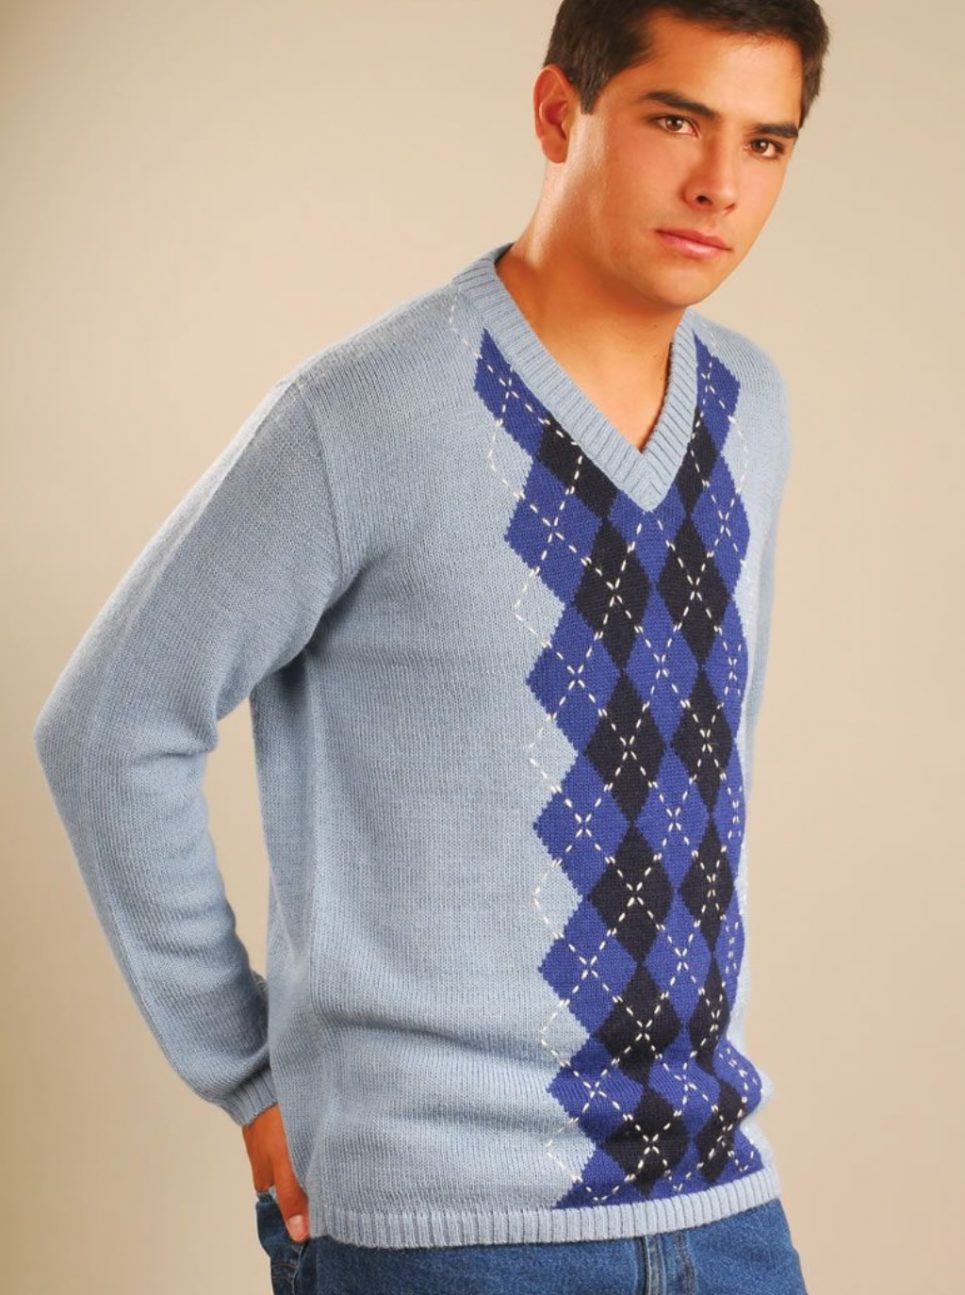 Scottish Sweater for Men with a V Neck